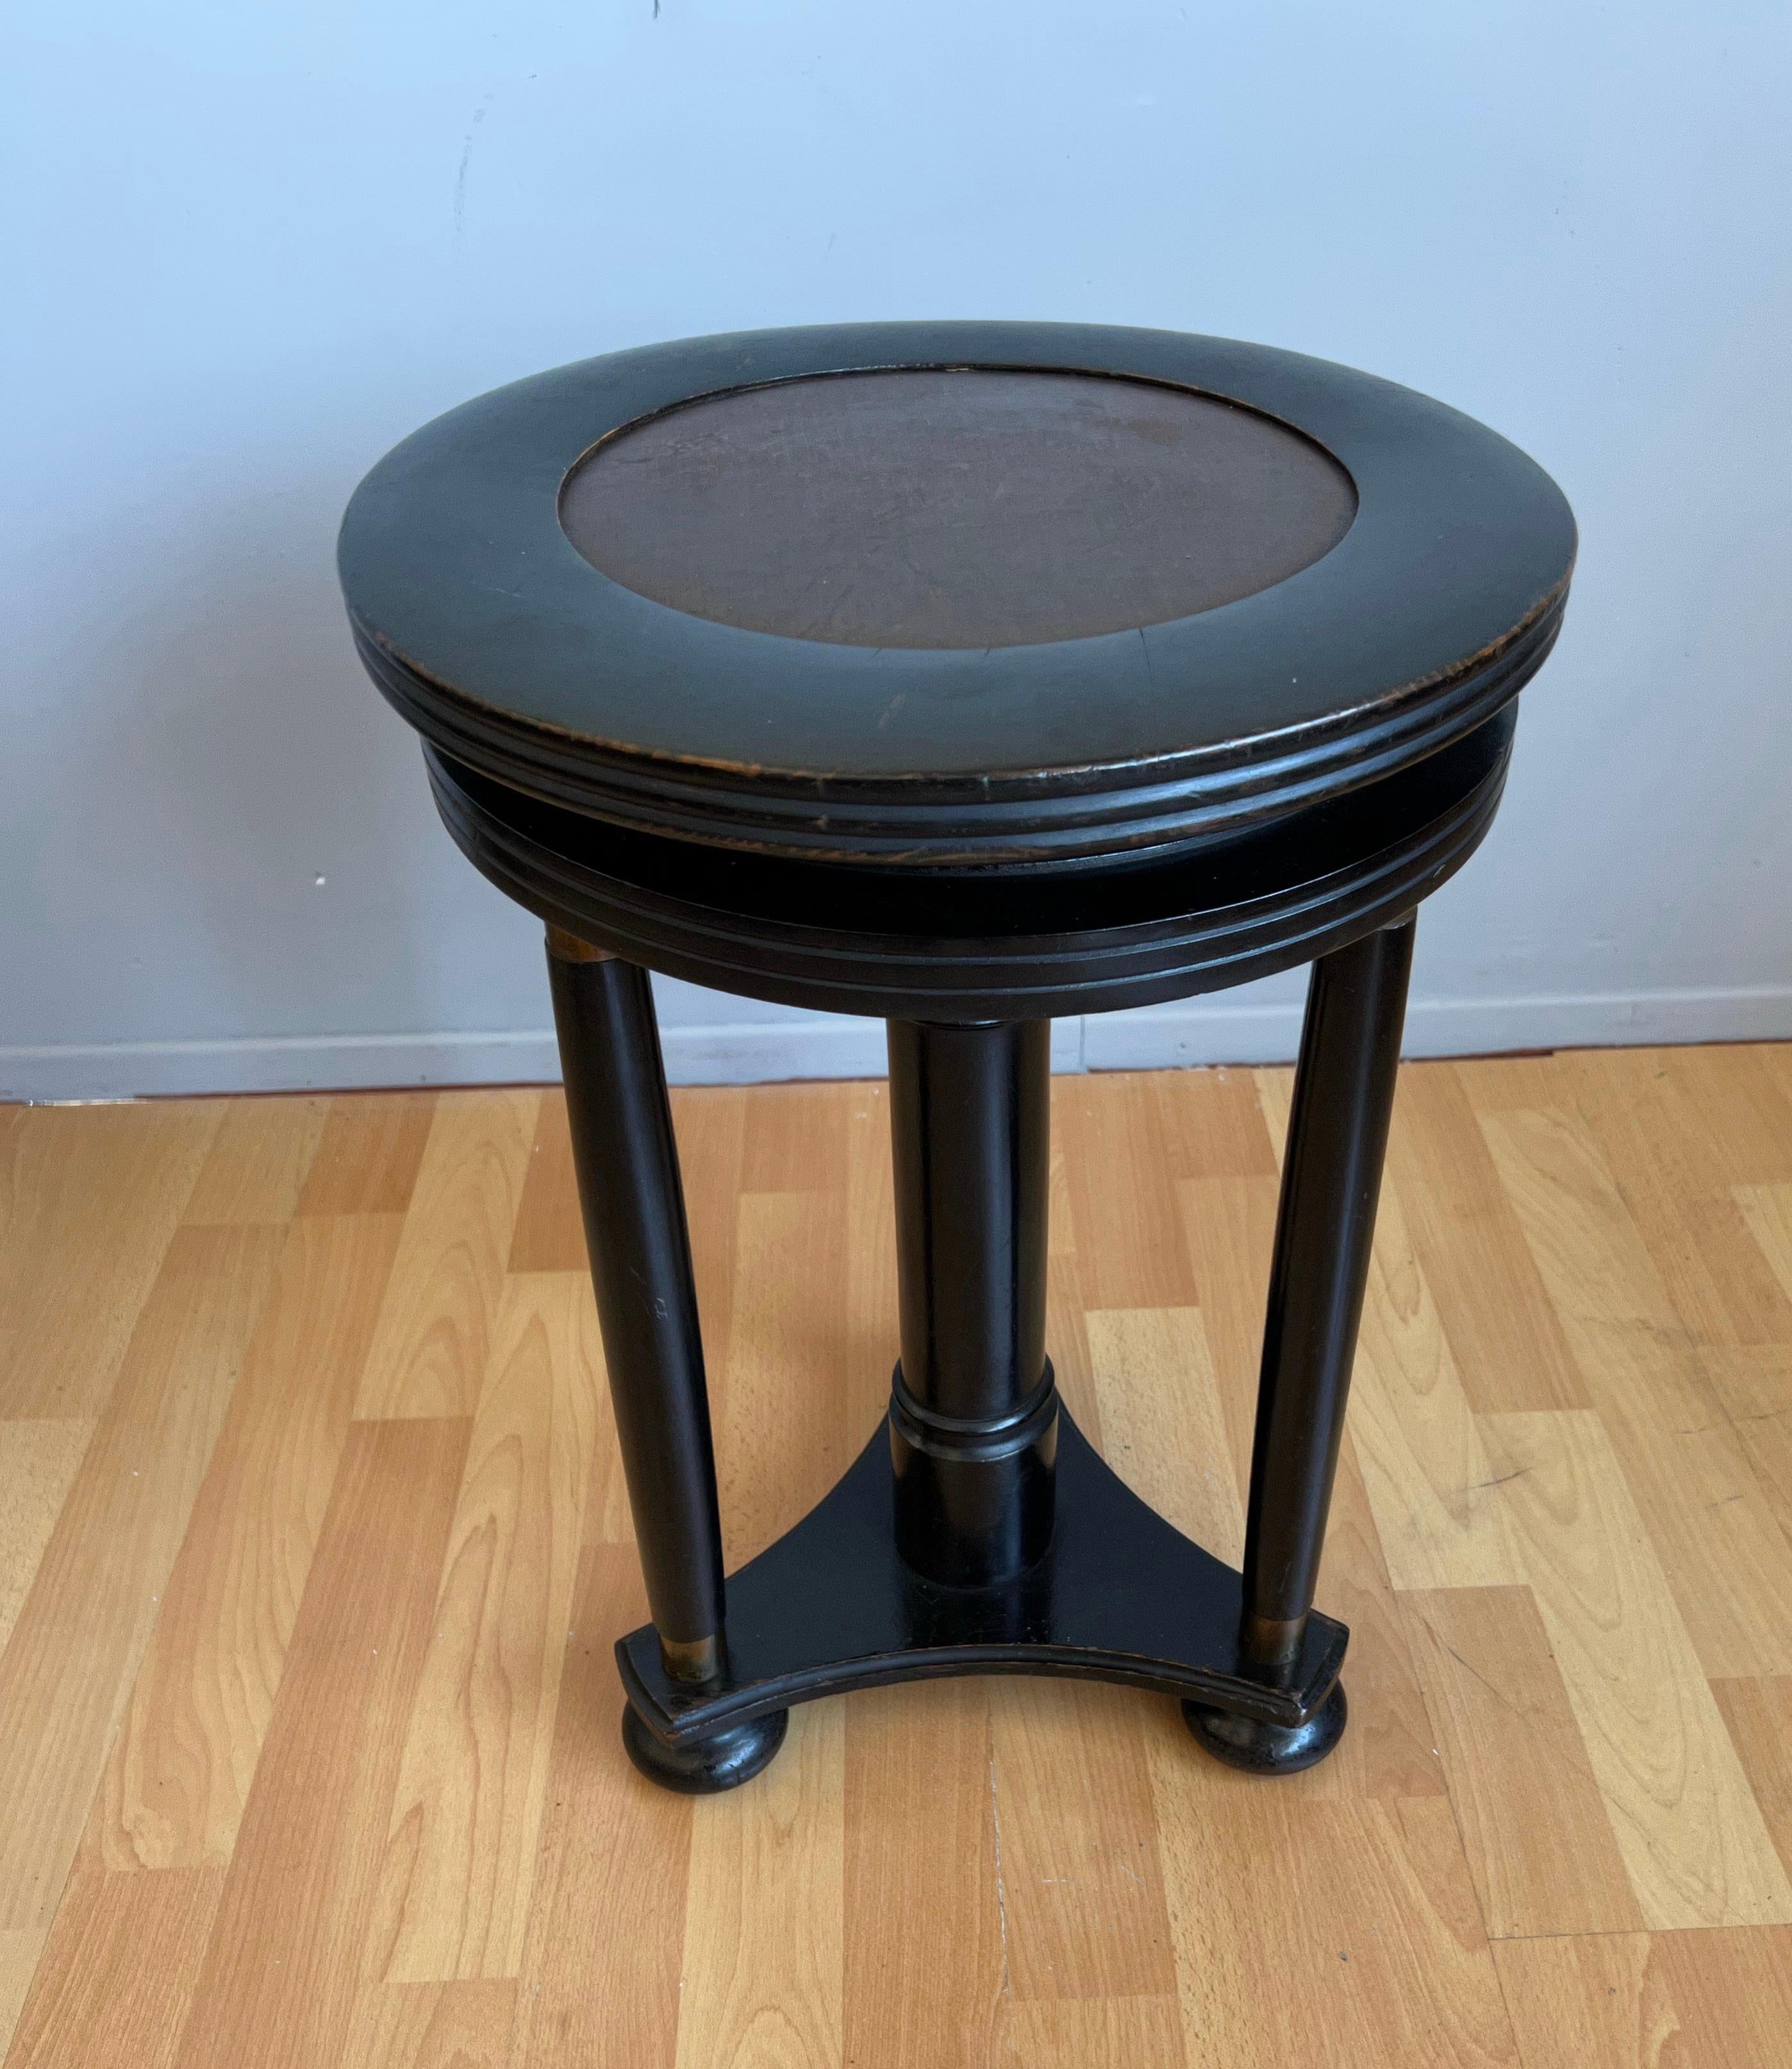 Stylish Blackened Wooden and Brass Art Deco Desk or Piano Swivel Stool, ca 1900 For Sale 2